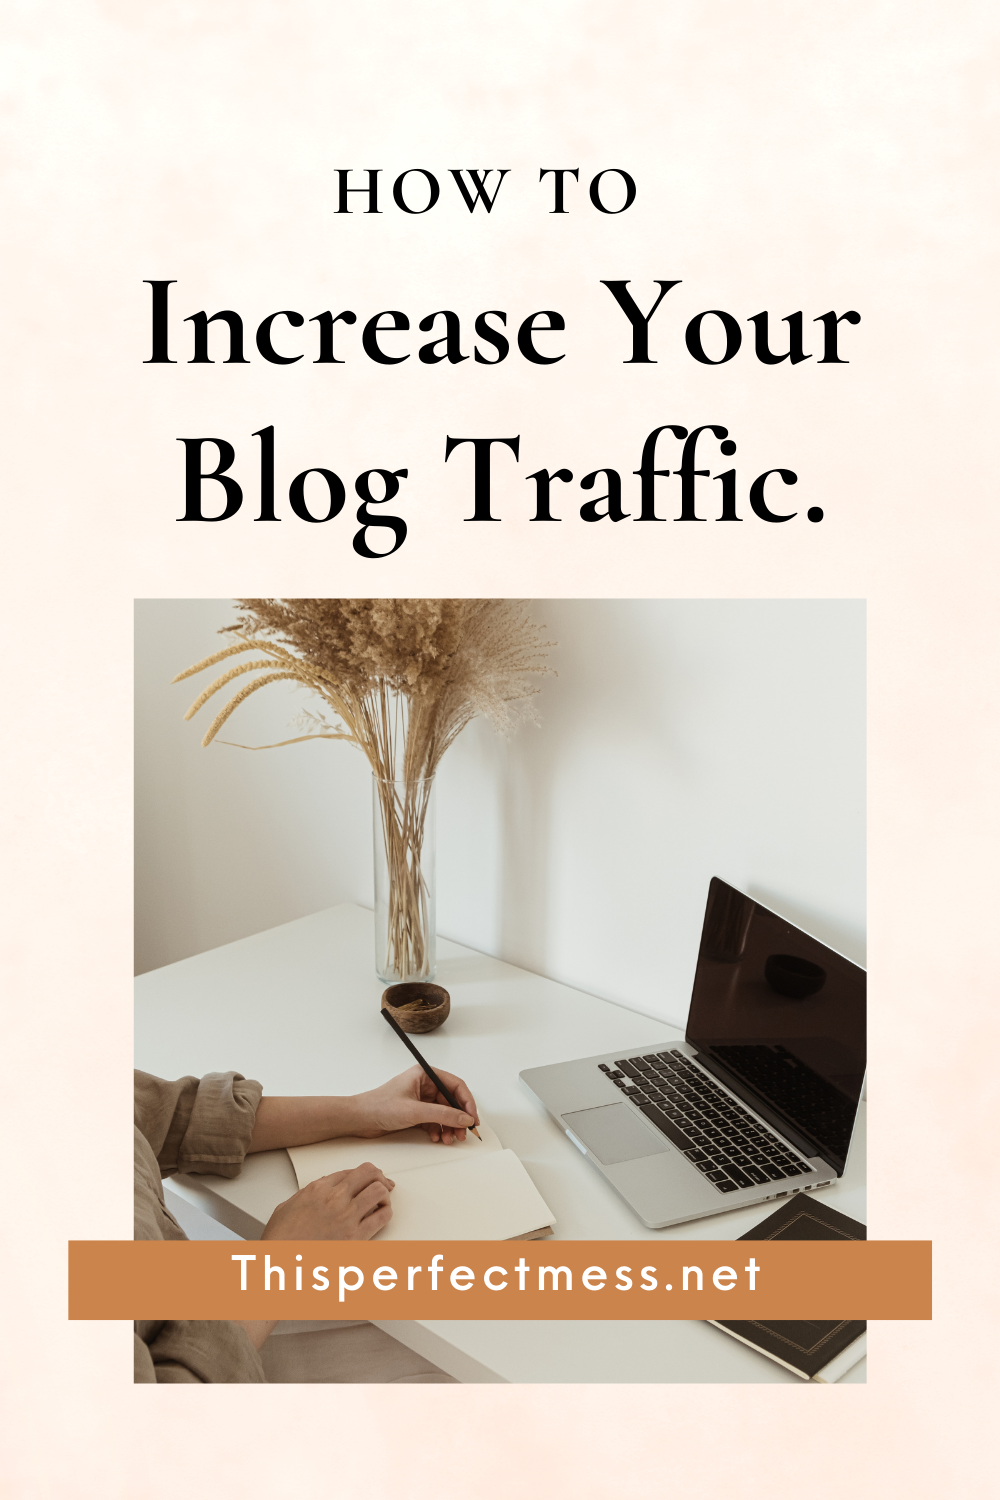 How to increase your blog traffic